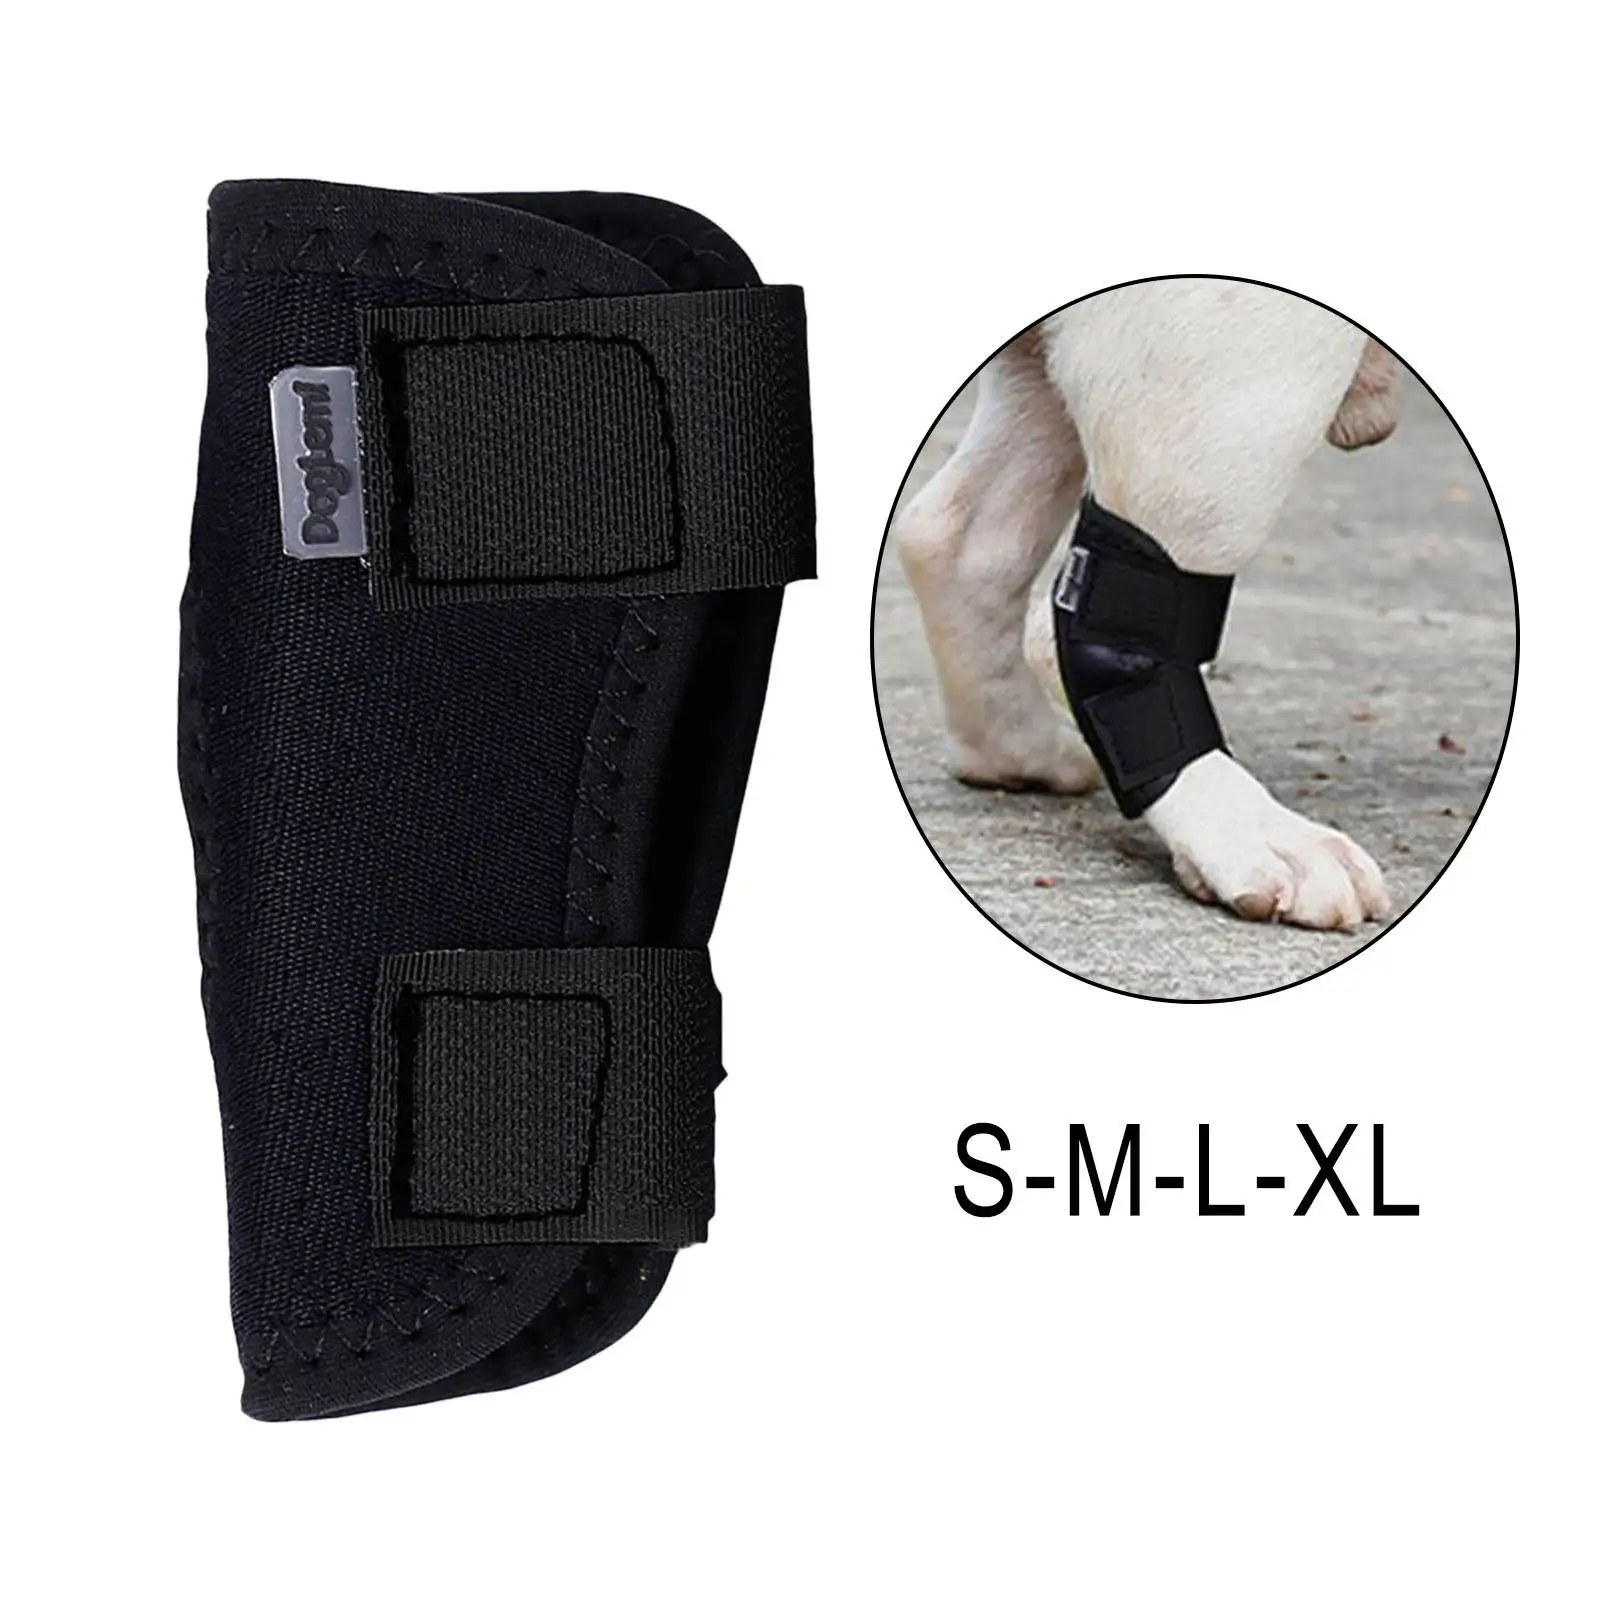 Adjustable Dog Leg Brace Hock Protector Joint Knee Support for Joint Wrap Injuries Recover Sprains Anti-Licking Ankle Protection